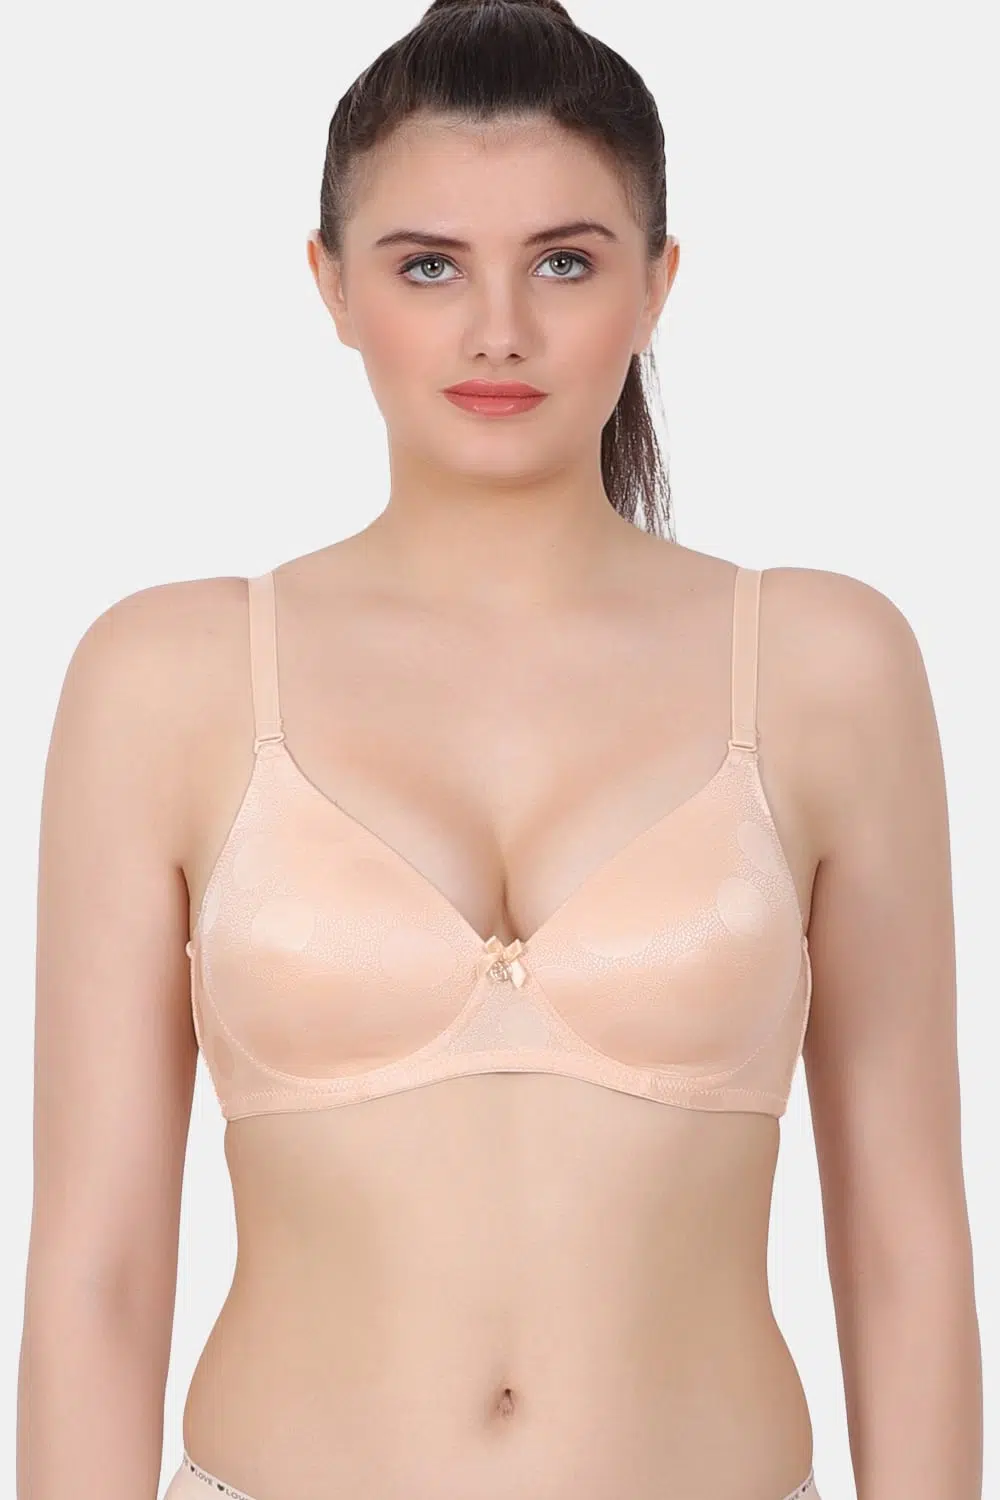 A fully coverage wire-free medium padded bra with designer